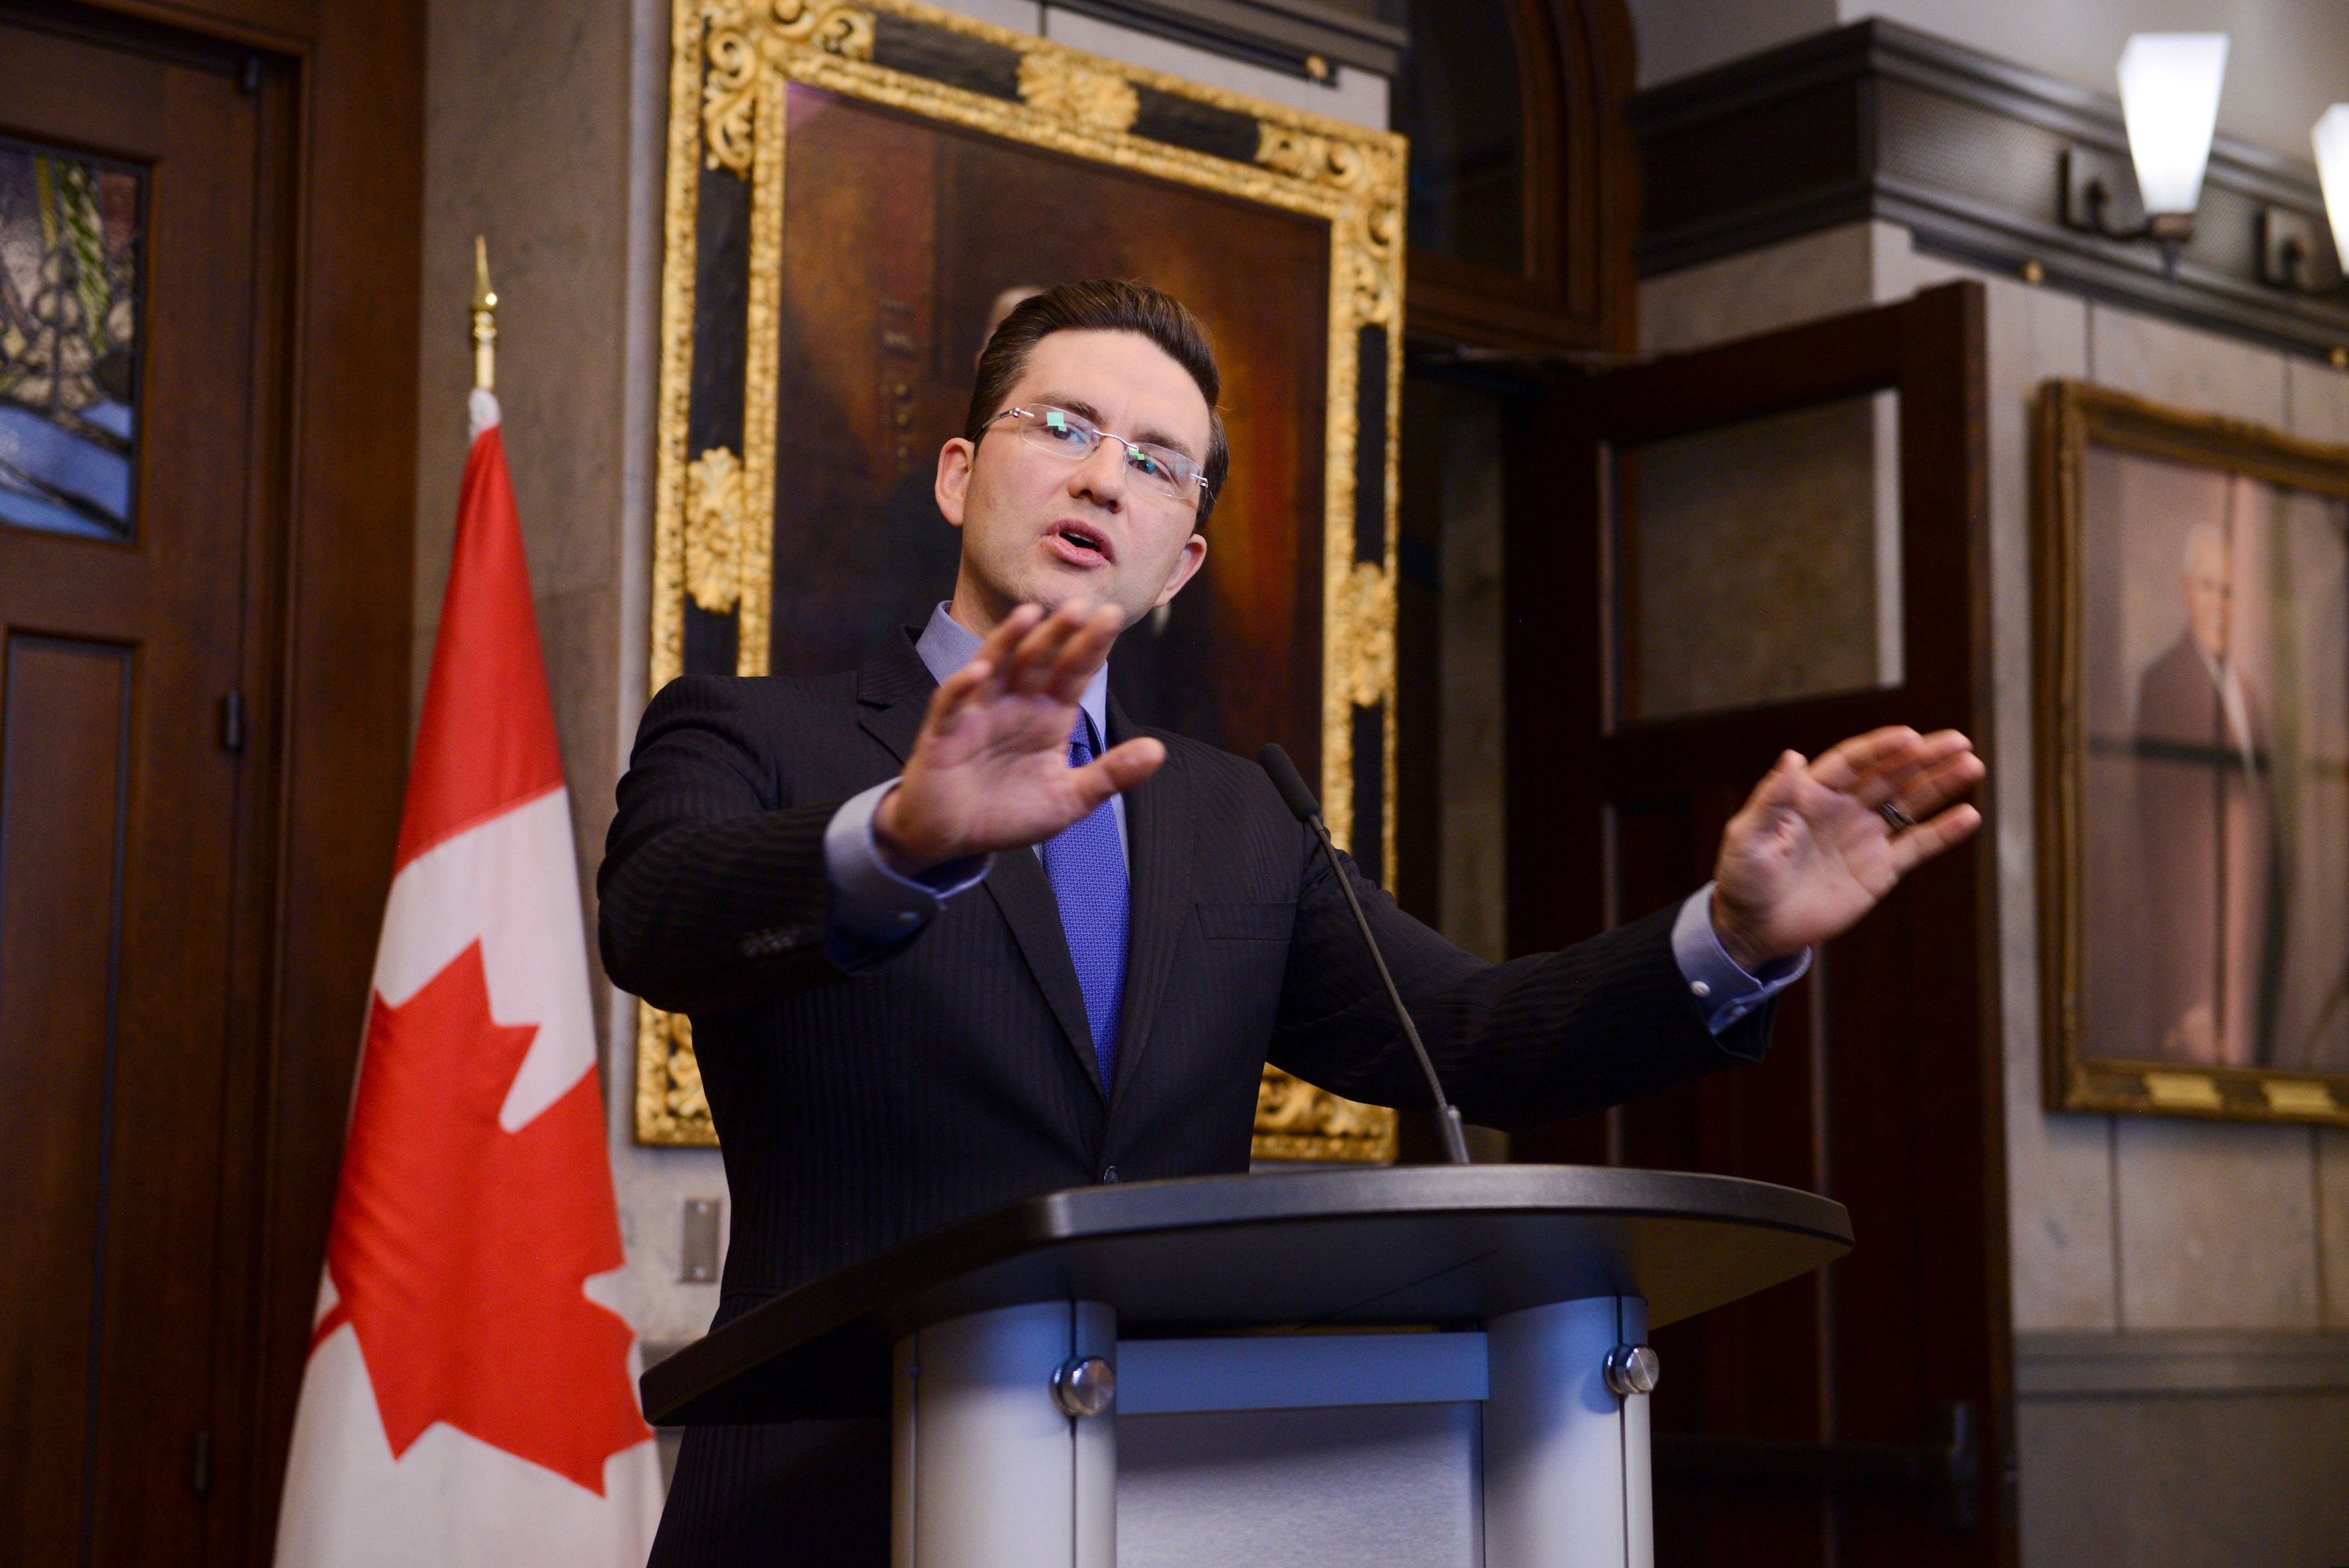 CONSERVATIVE-PARTY-LEADERSHIP-PIERRE-POILIEVRE-MACDOUGALL-JAN8